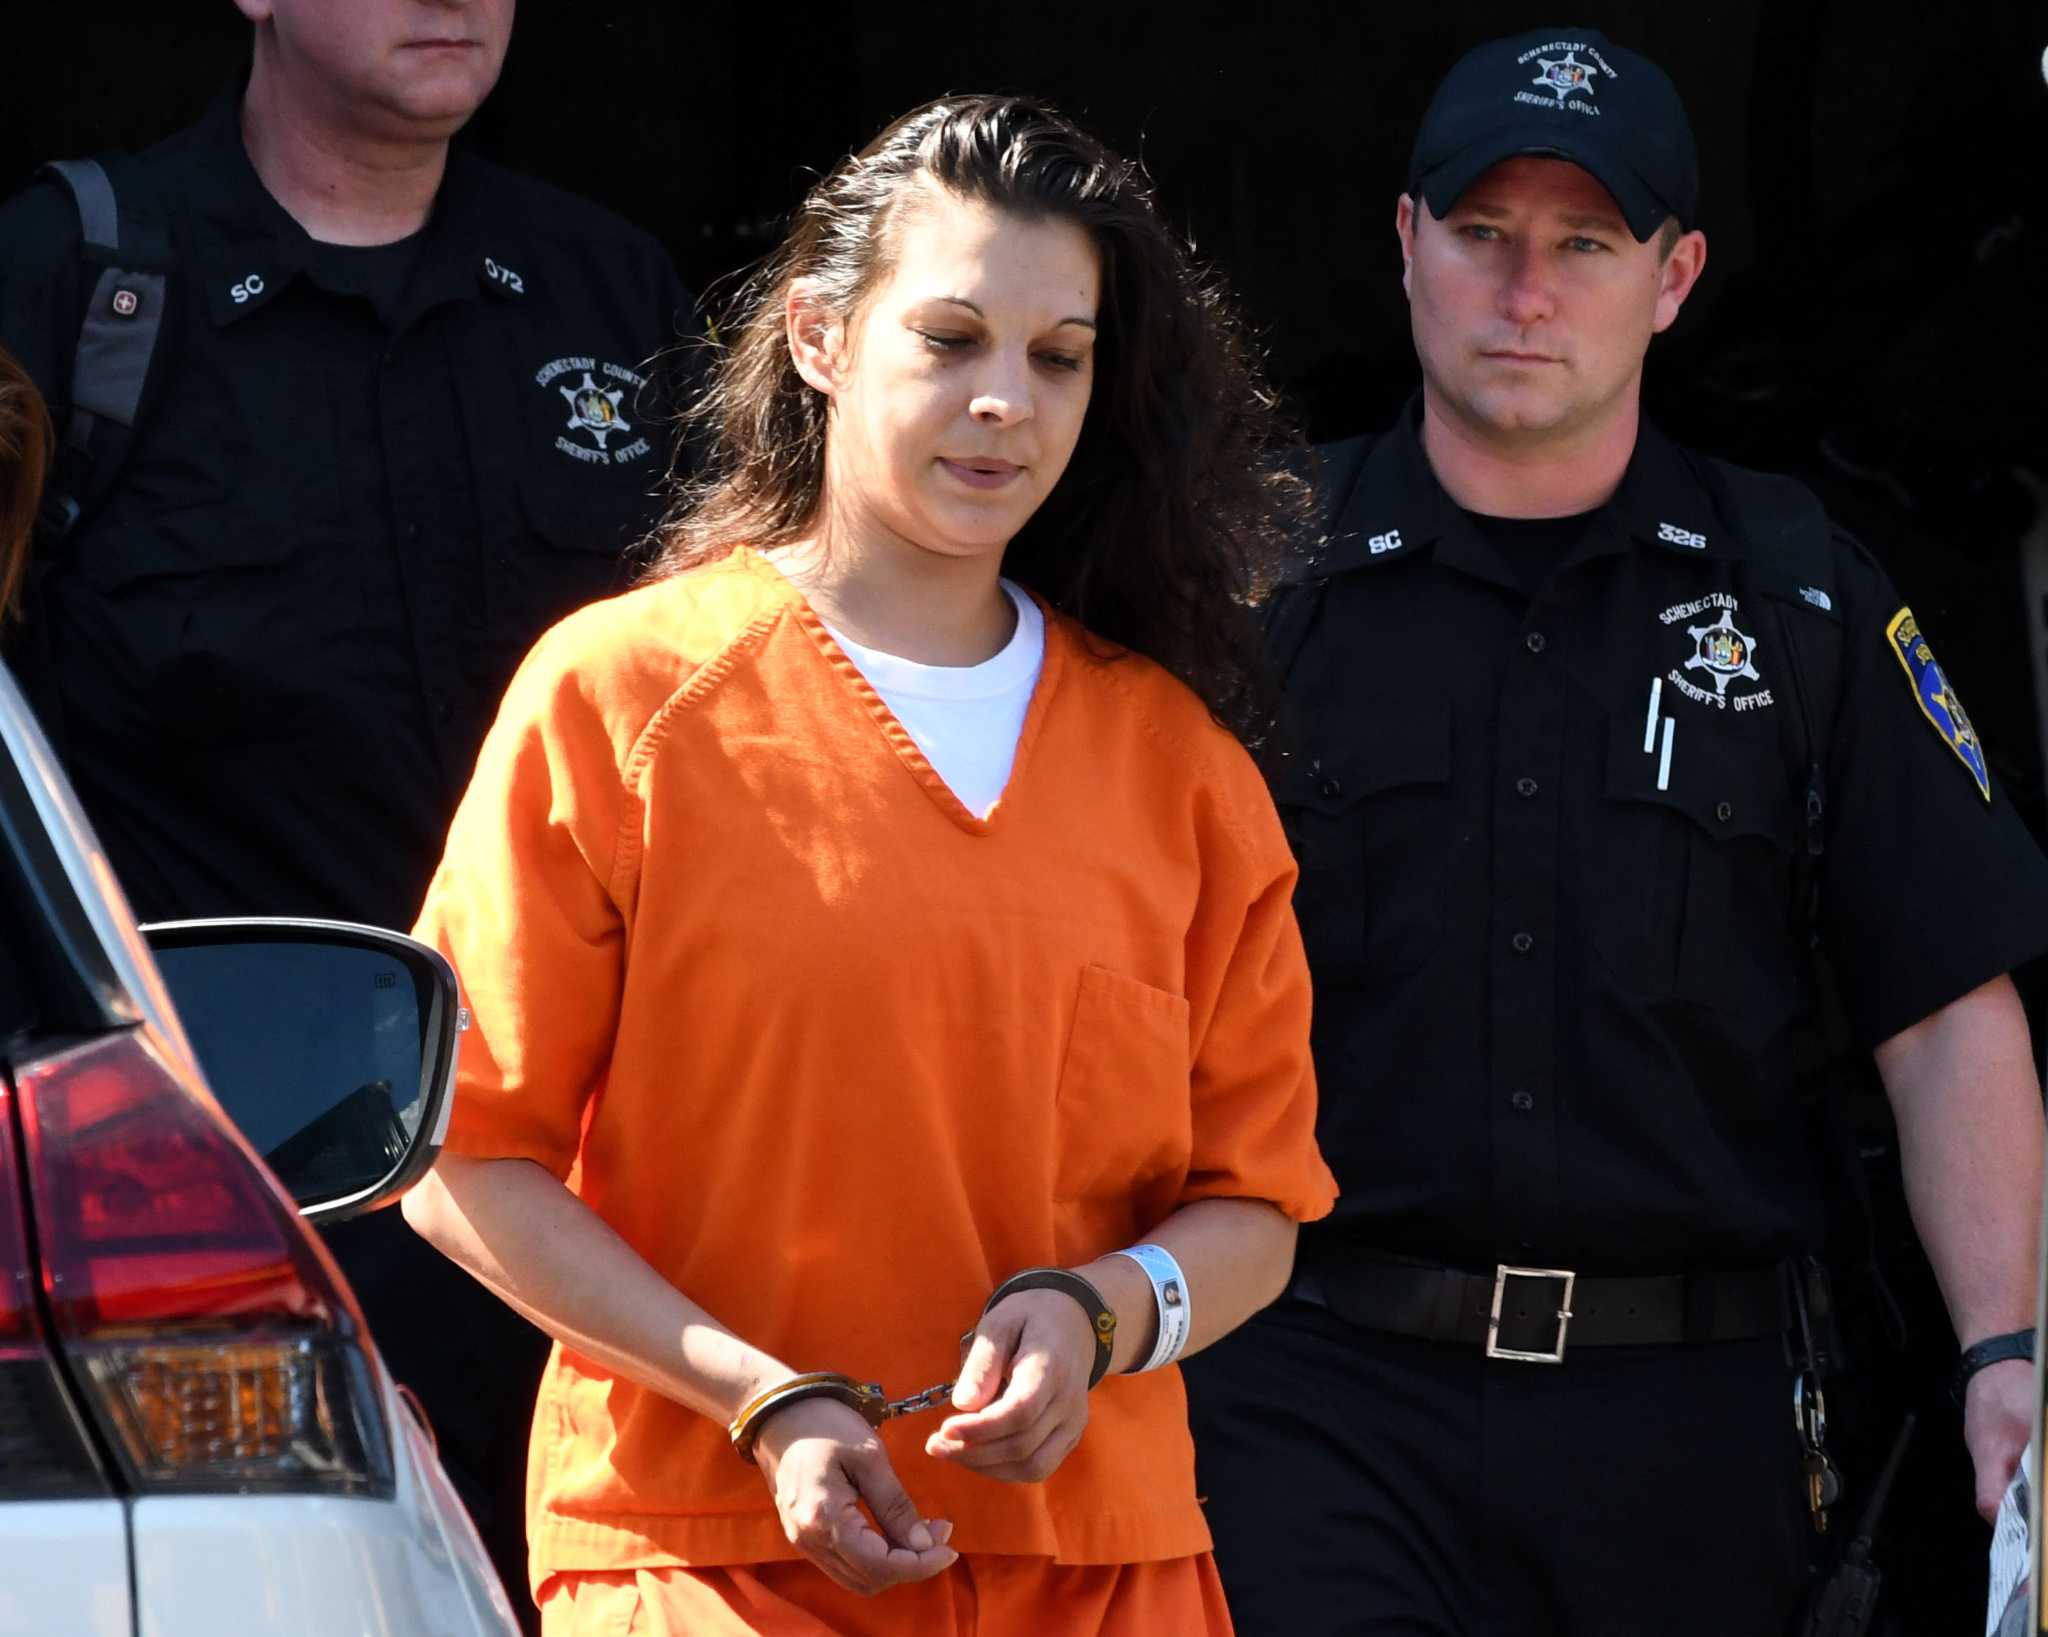 Schenectady mother admits killing infant son - Times Union2048 x 1637